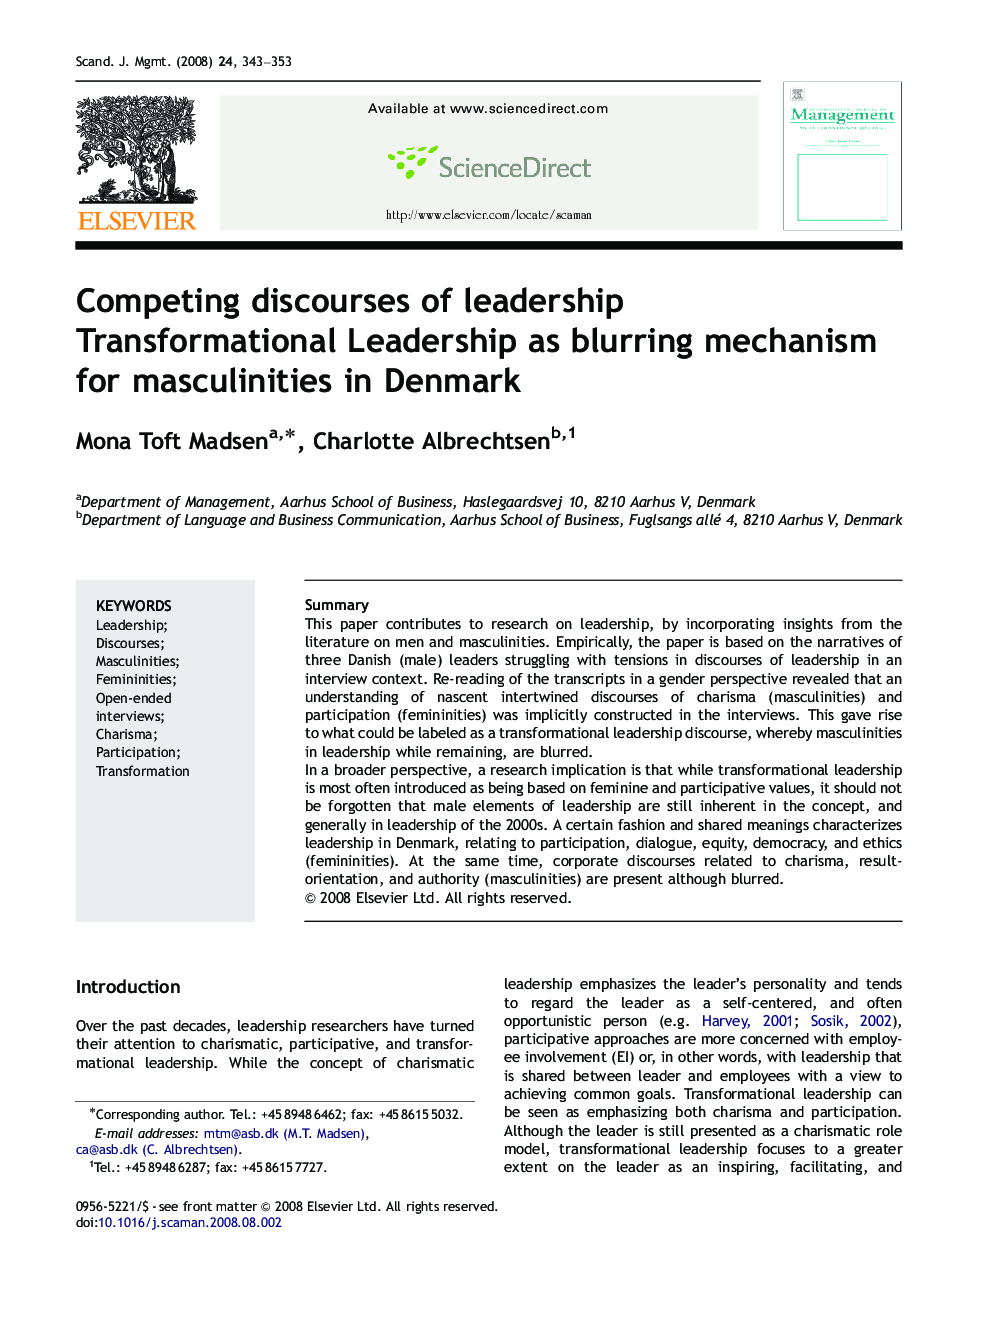 Competing discourses of leadership: Transformational Leadership as blurring mechanism for masculinities in Denmark